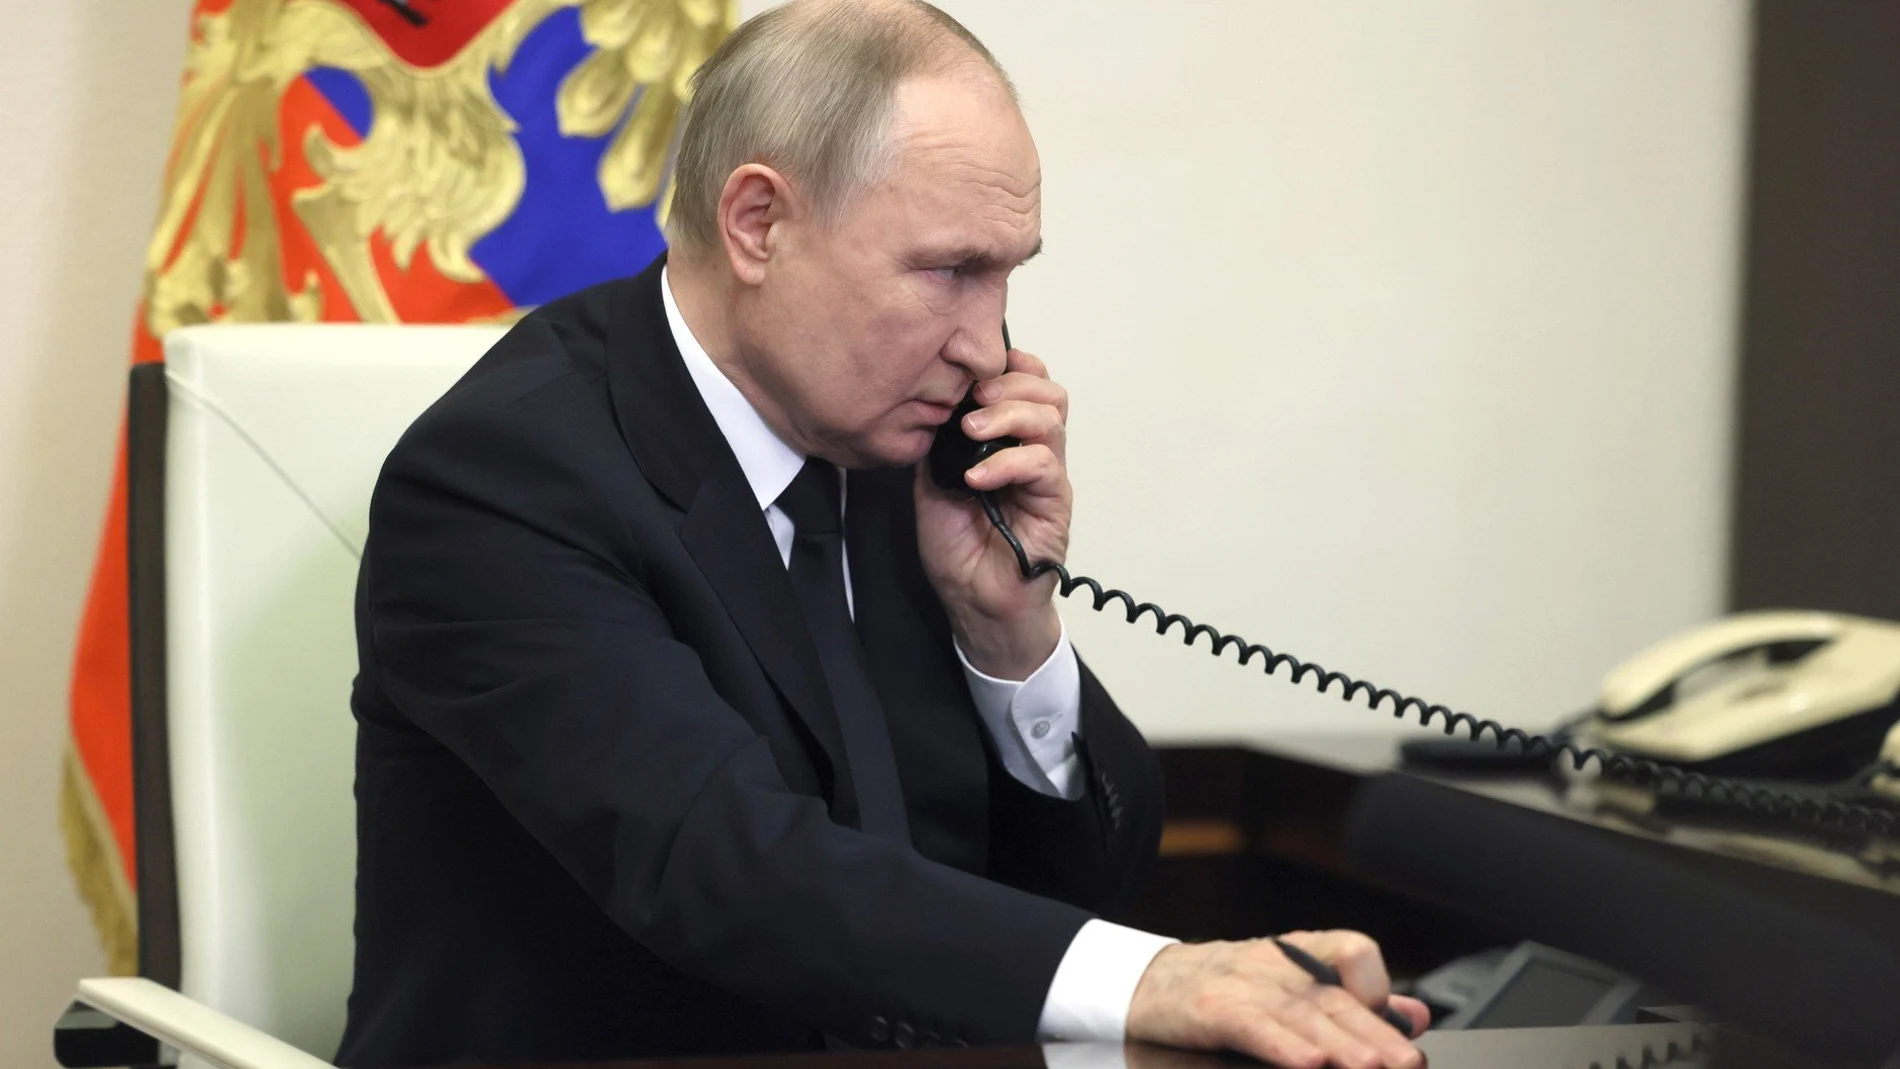 Russian President Vladimir Putin speaks over the phone during his address, the day after a terror attack on the Crocus City Hall in Krasnogorsk.